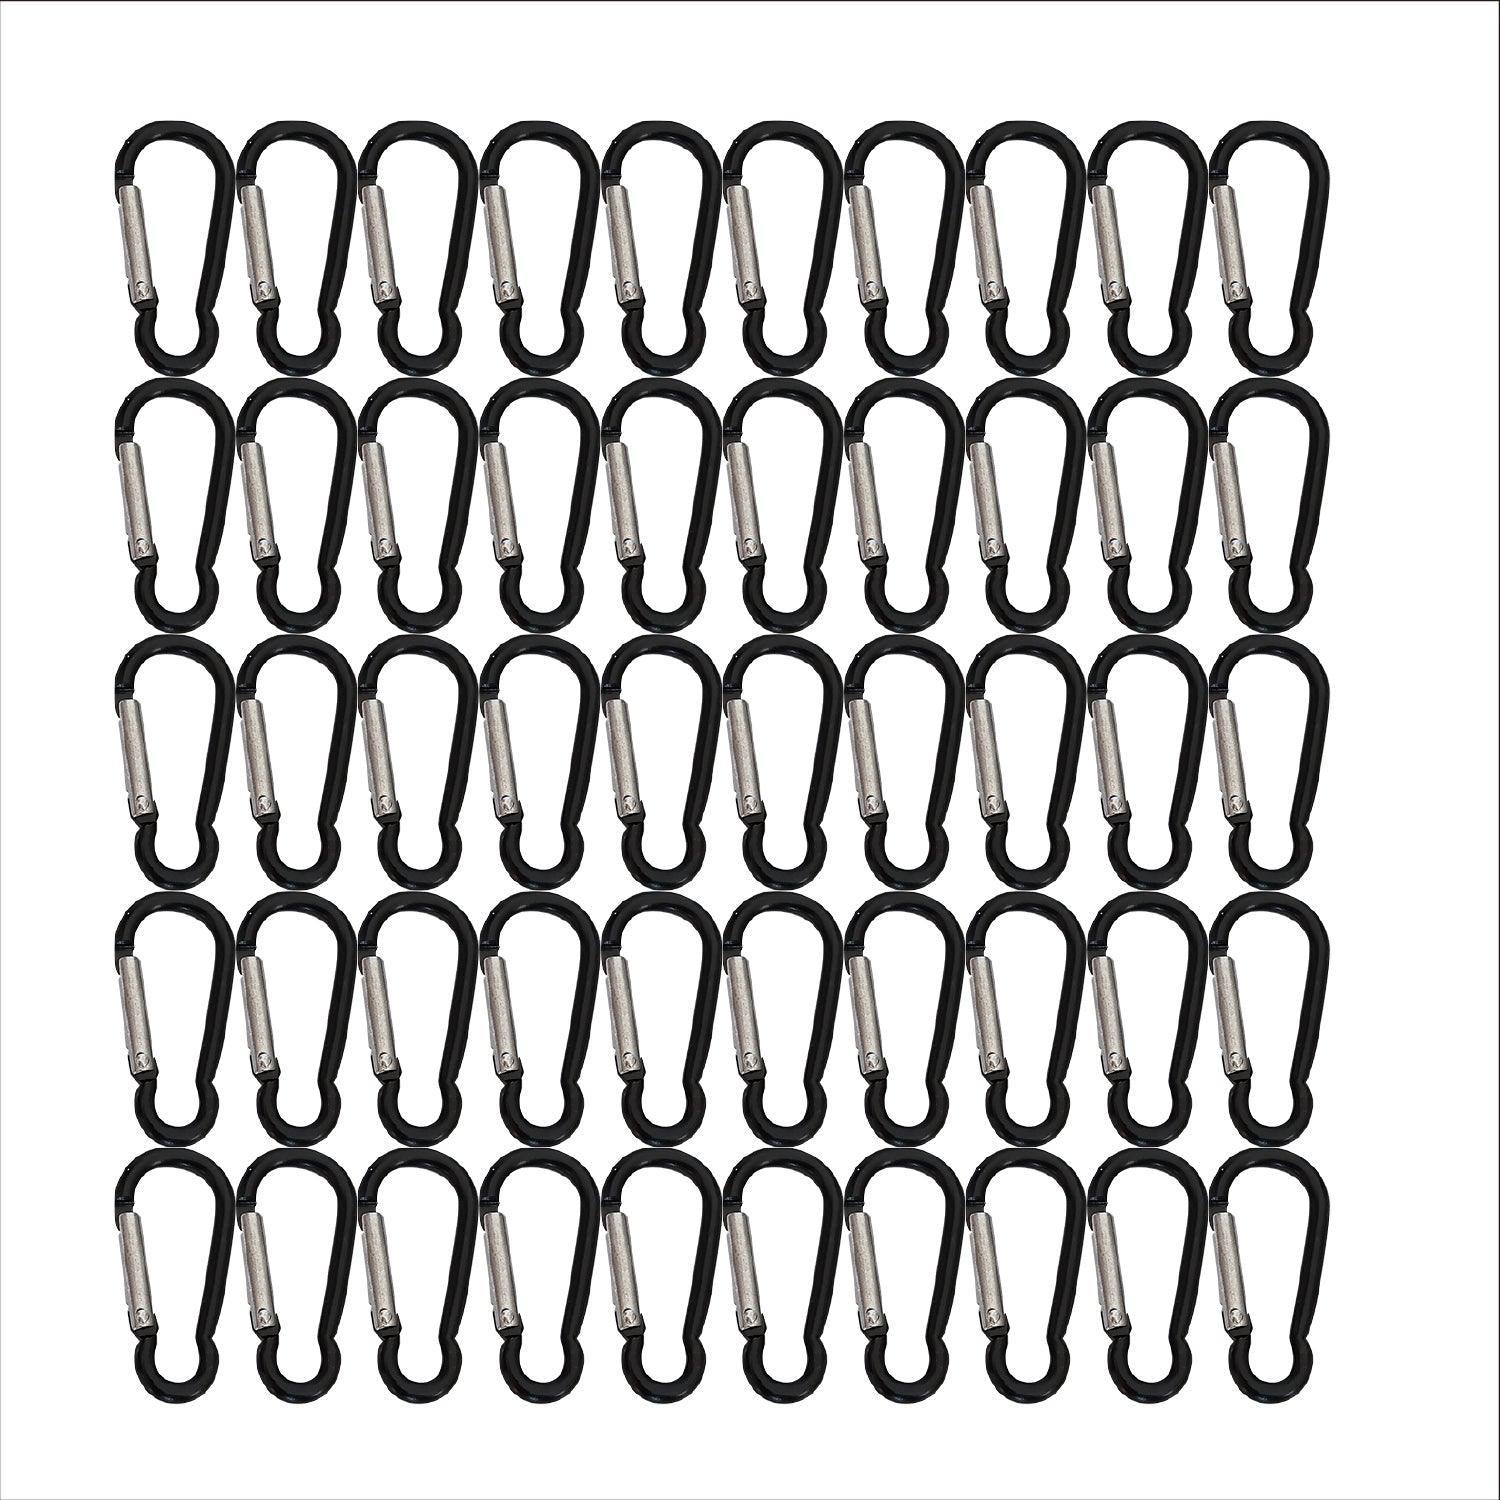 Carabiners - Black (Type 2) - Cams Cords